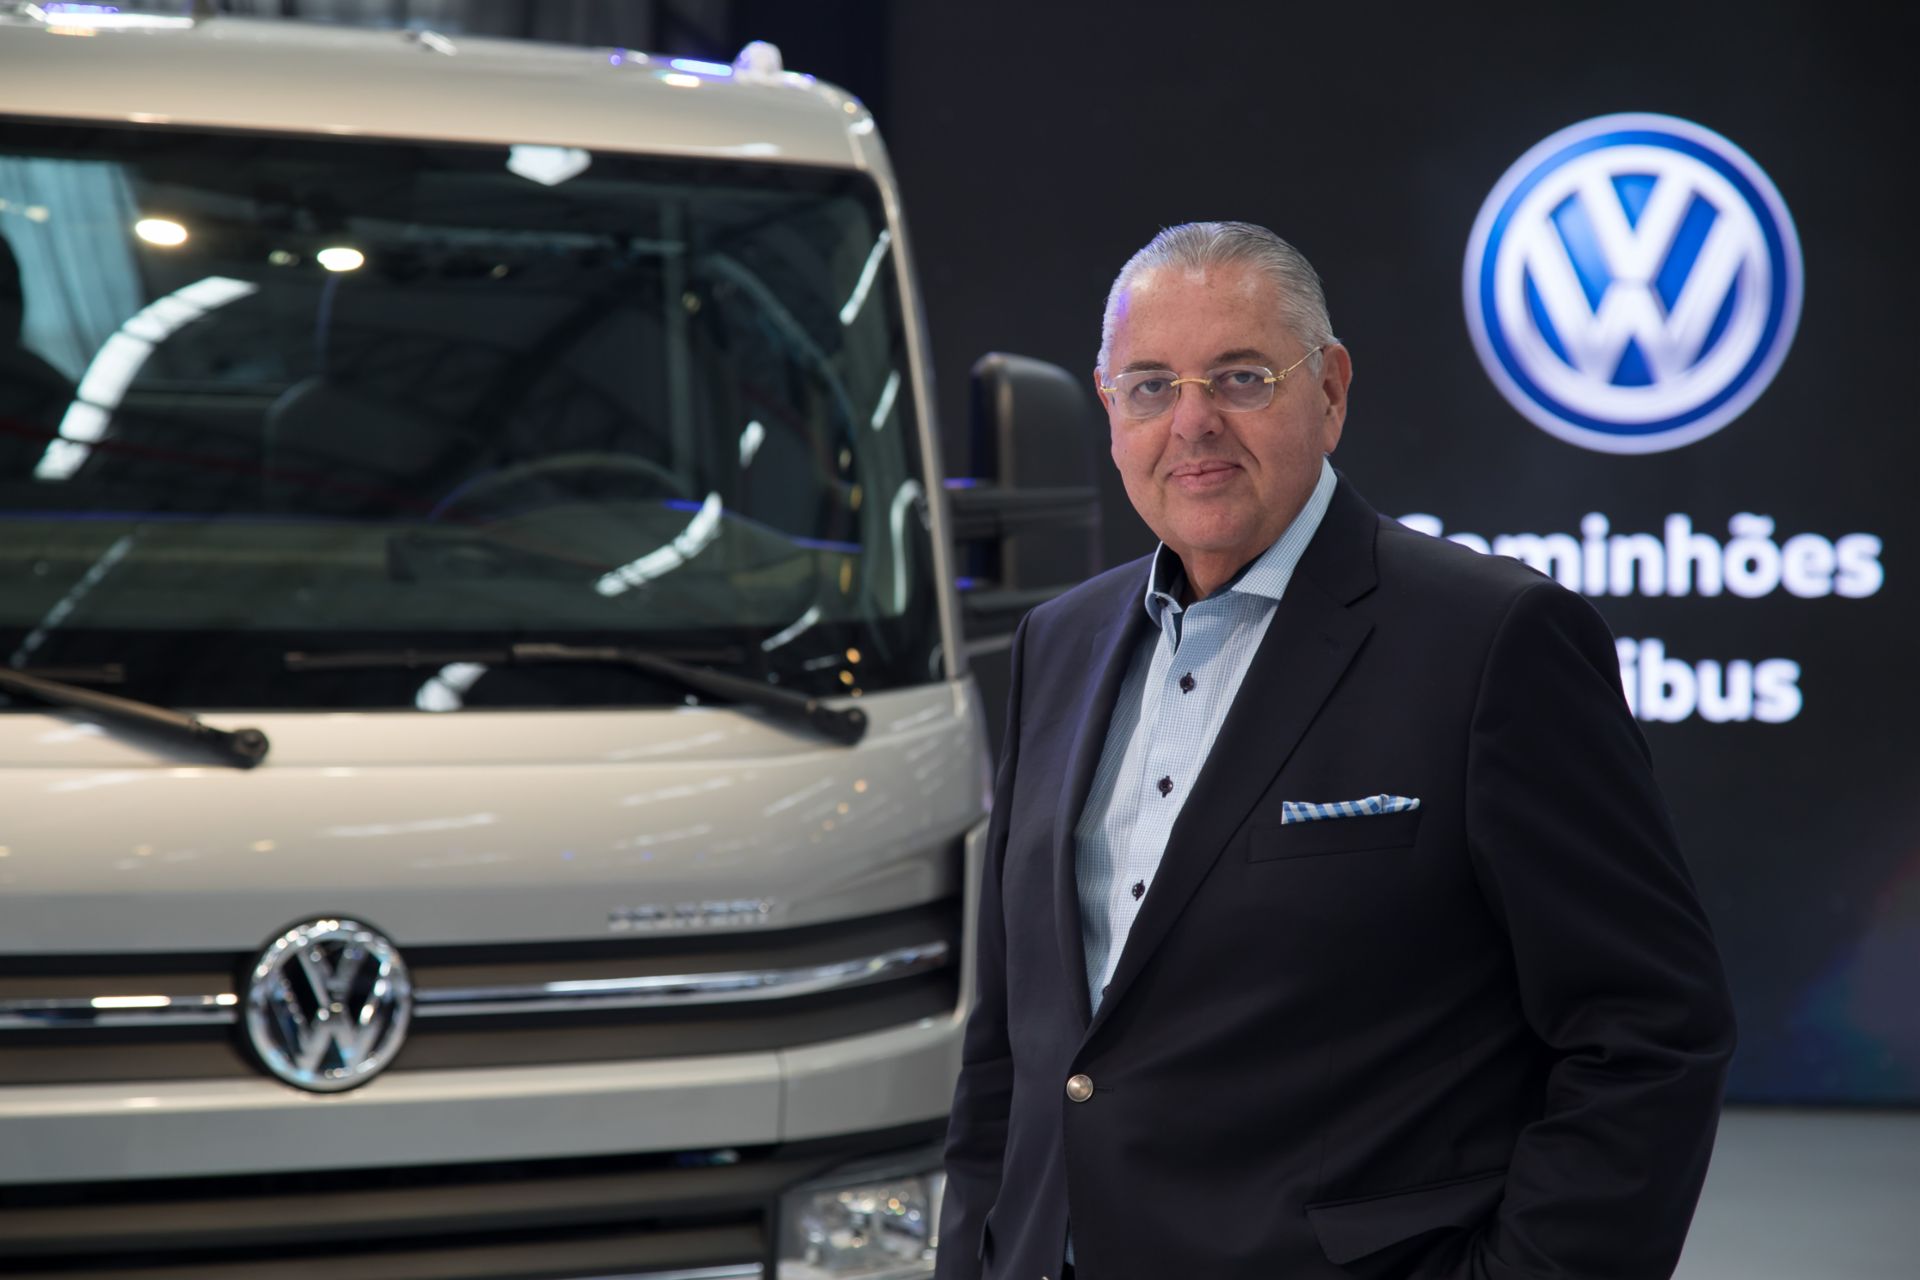 Mr. Roberto Cortes is the president and CEO of Volkswagen Caminhões e Ônibus and also a Board Member of TRATON AG.
                 